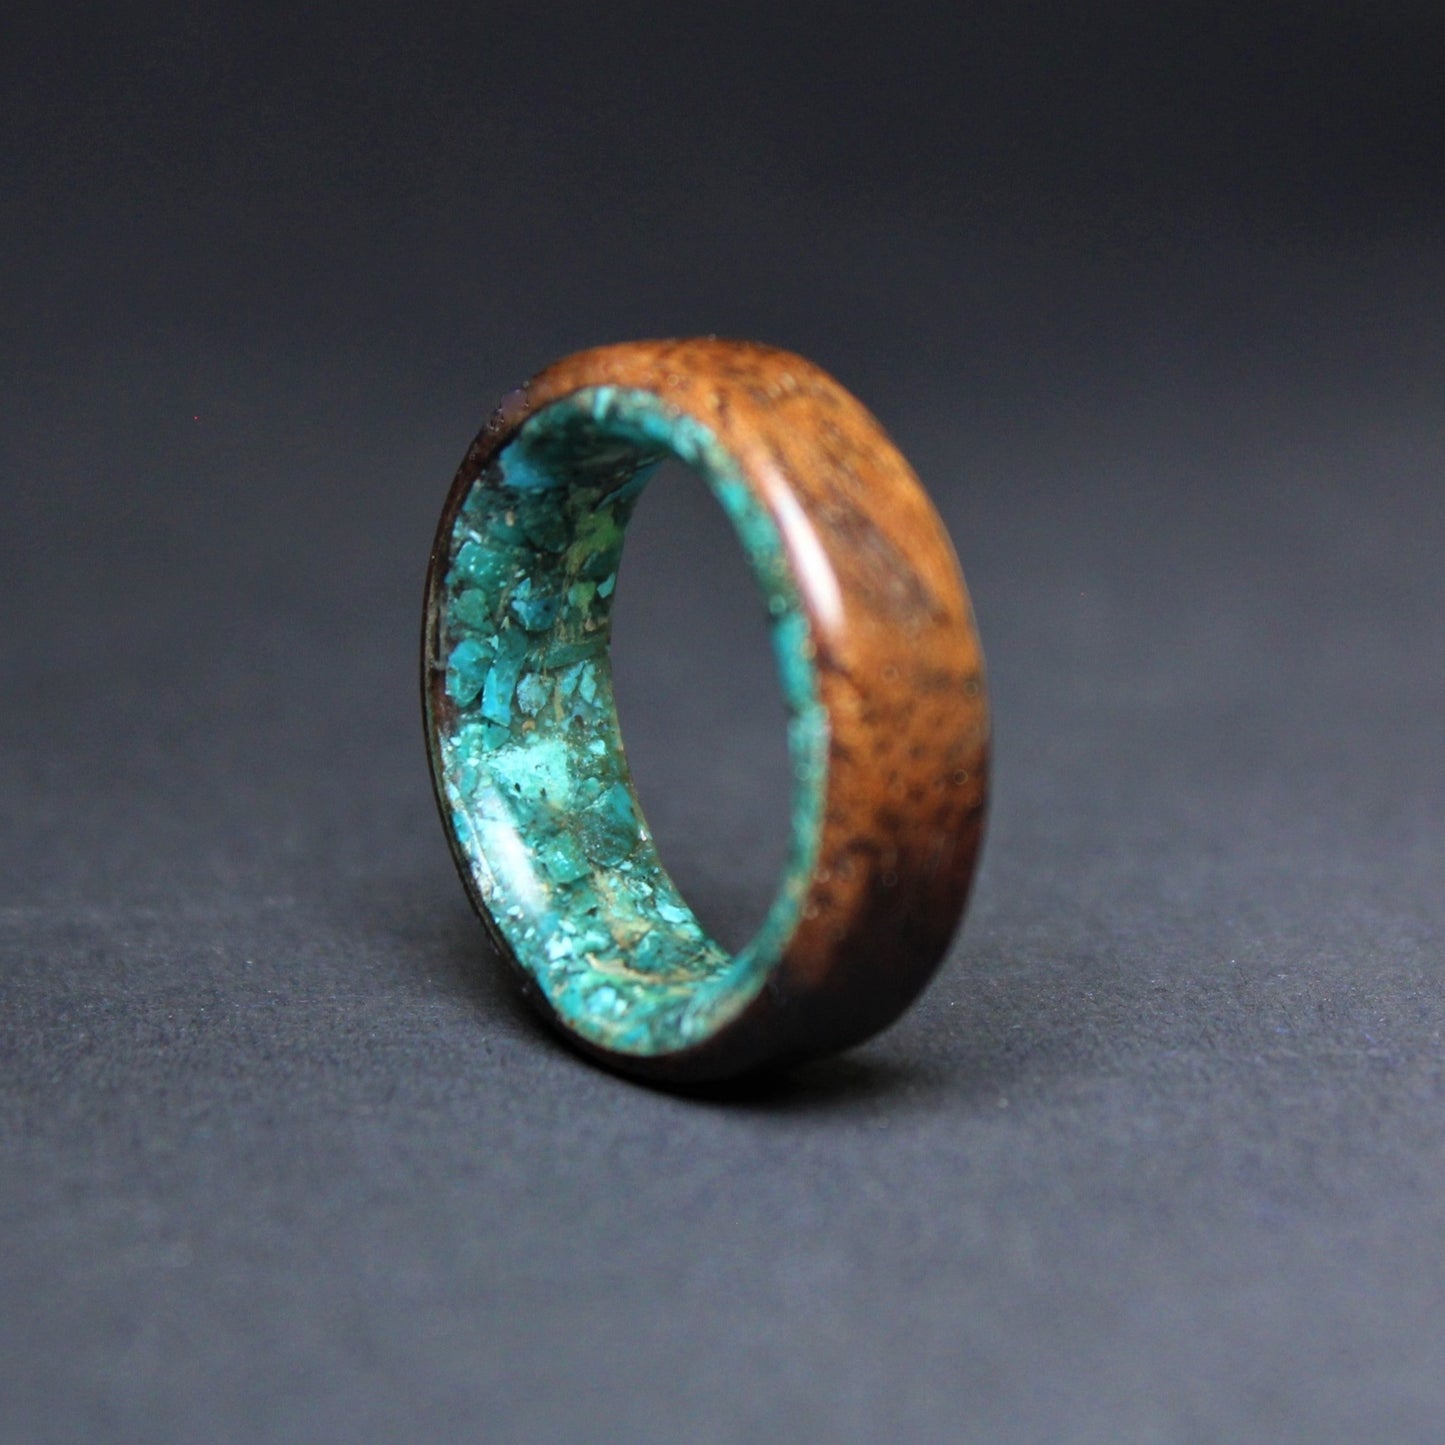 Mahogany Wood and Turquoise Glow Core Ring